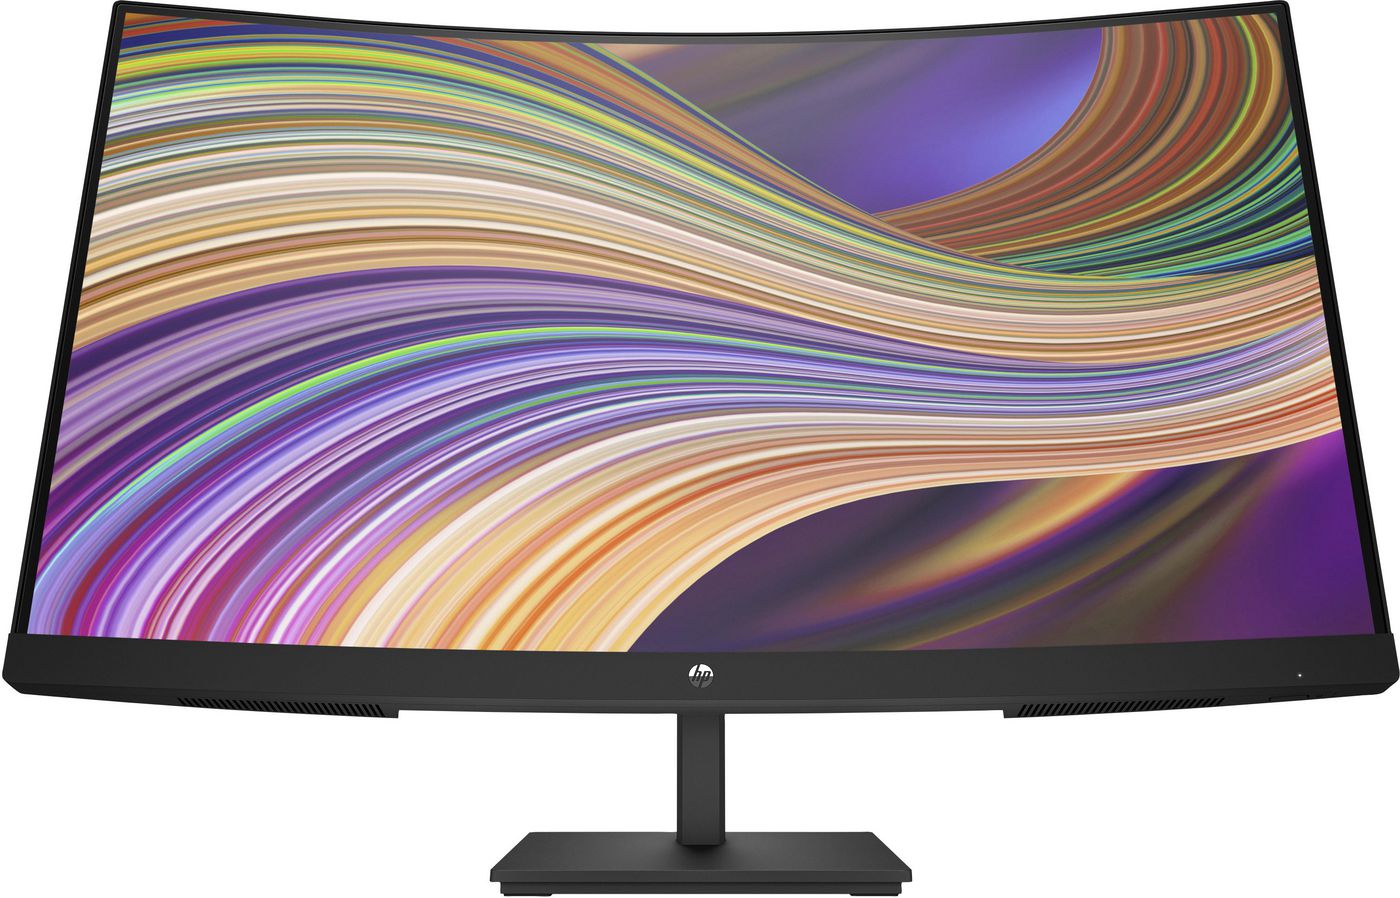 Curved Monitor - V27c G5 - 27in - 1920x1080 (FHD)